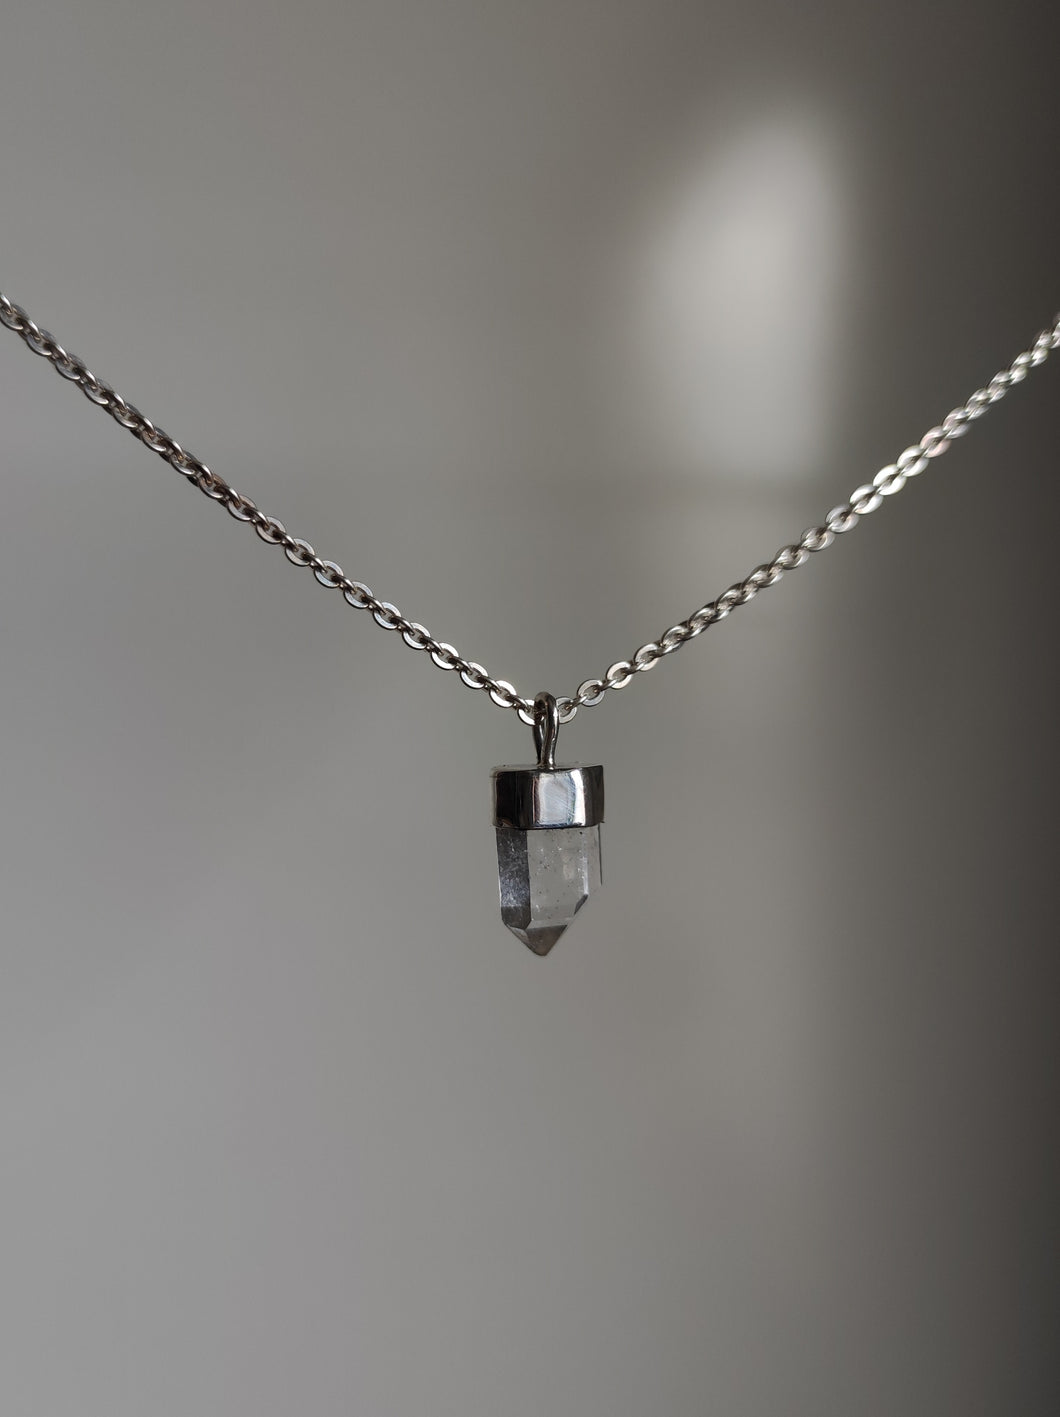 A Australian Clear Quartz Necklace by Kathrin Jona with a small crystal on it.